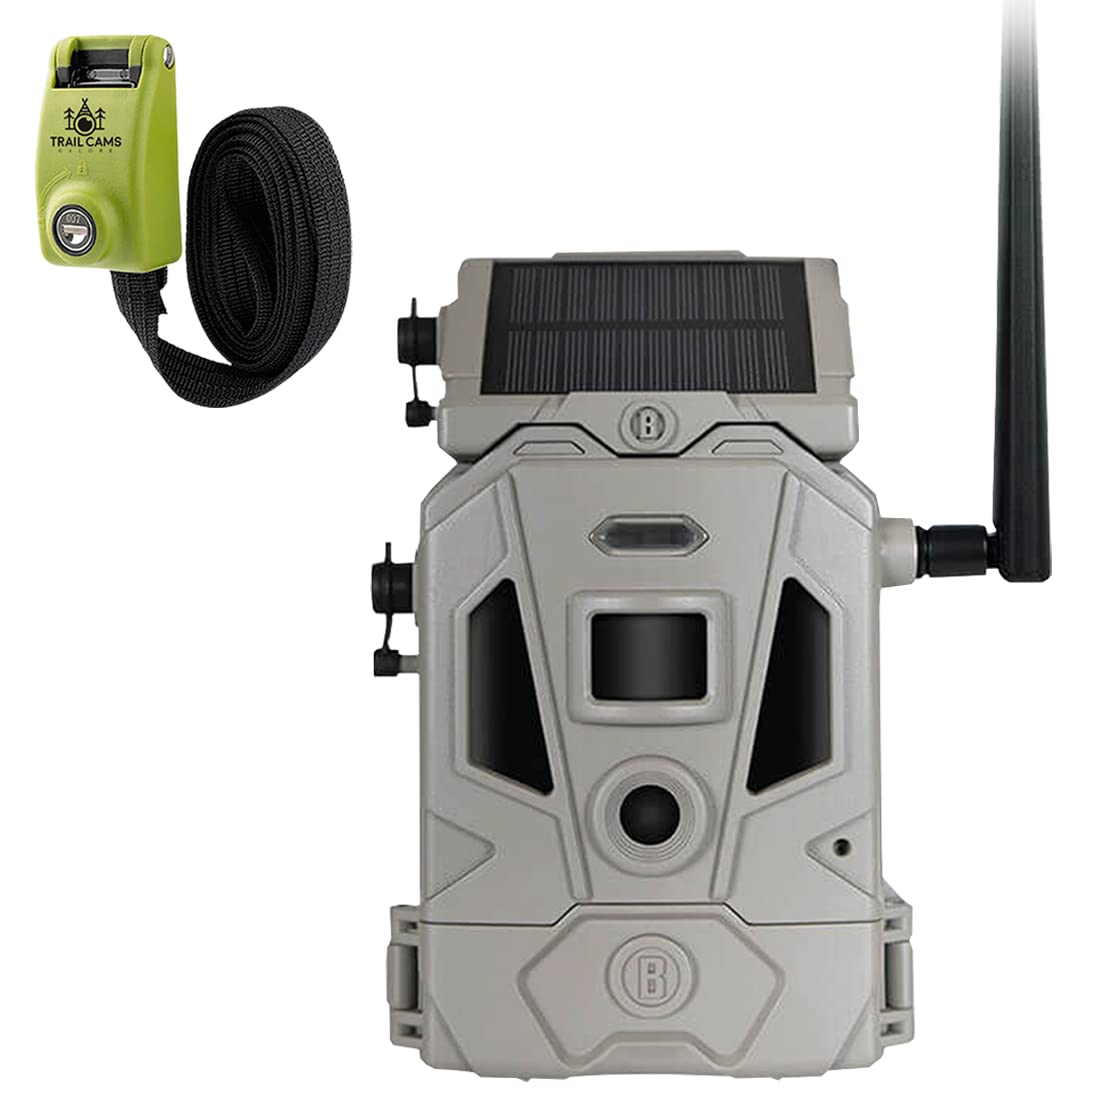 Bushnell CelluCORE 20 Solar Trail Camera, Low Glow Hunting Game Camera with Detachable Solar Panel with Bundle Options (Strap)